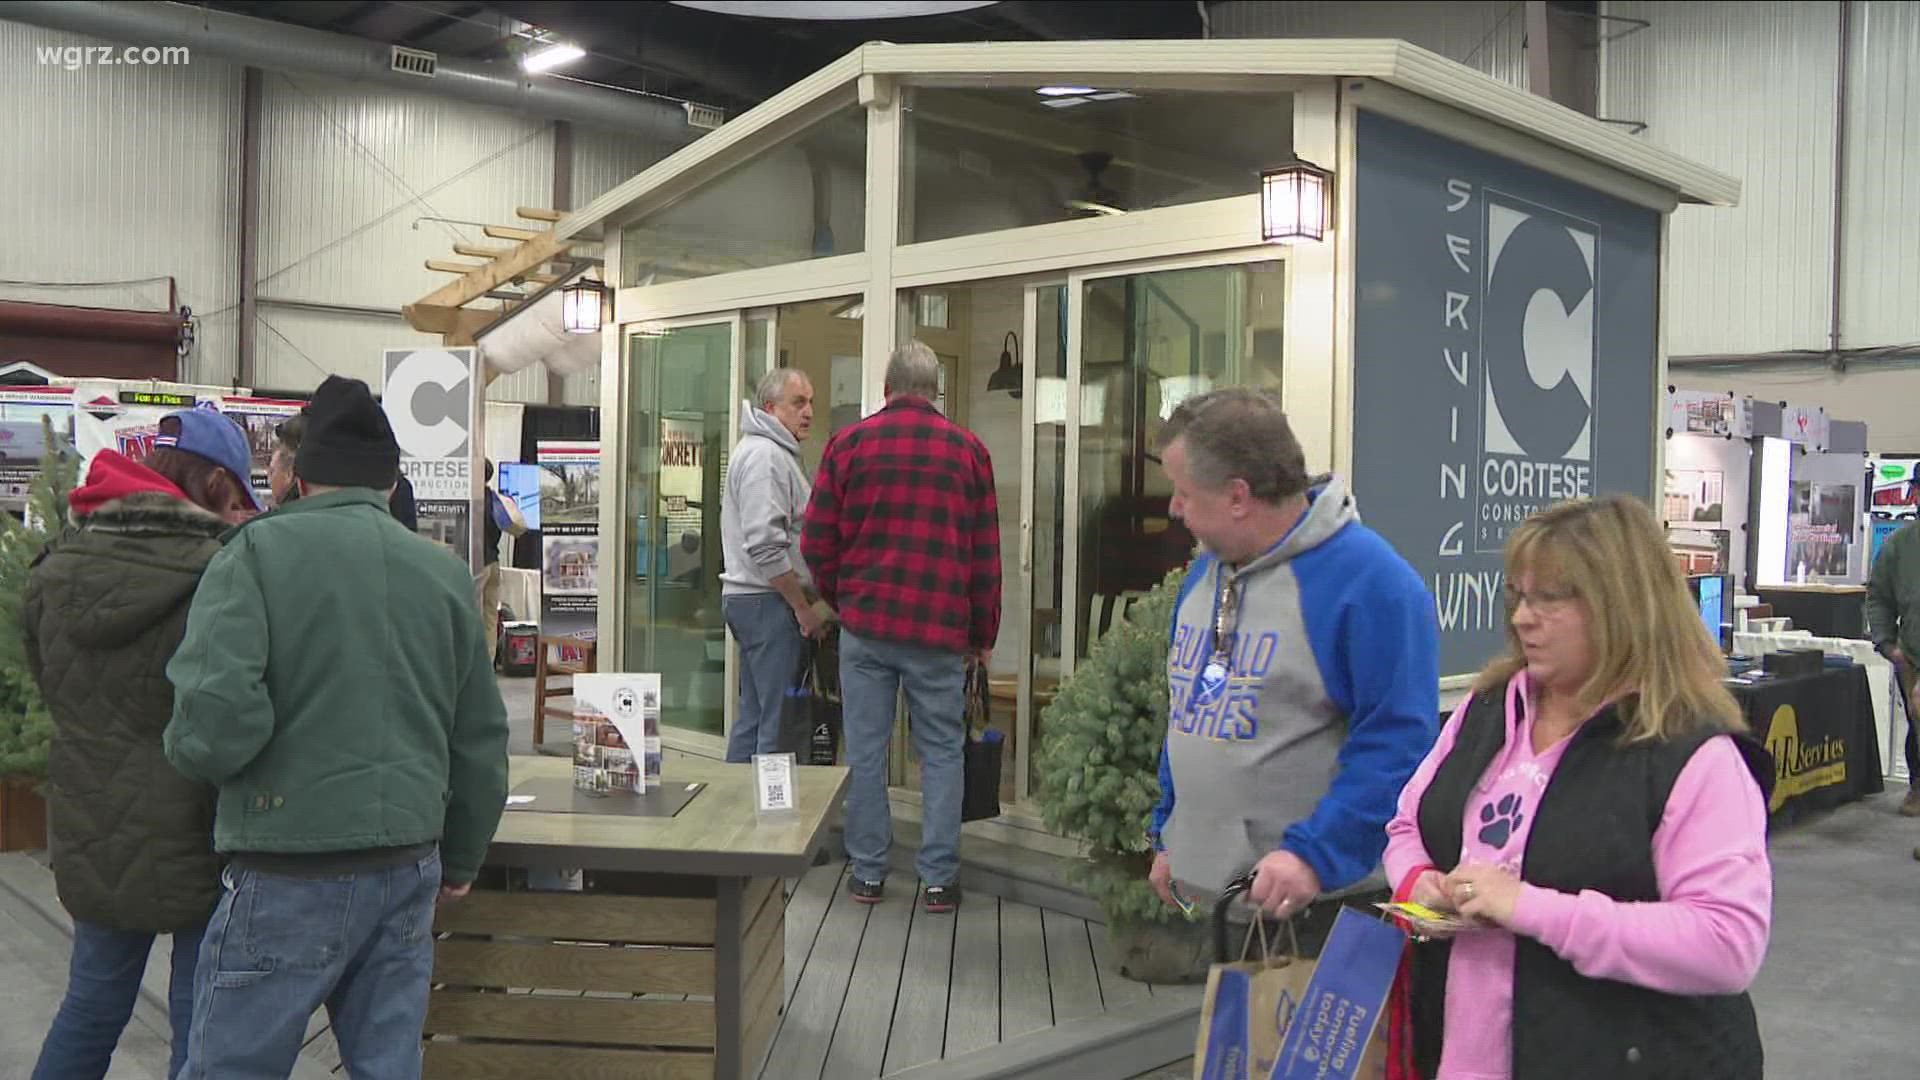 The home and outdoor living show in Hamburg is happening at the Fairgrounds Event Center.
Dozens of exhibits were on display.